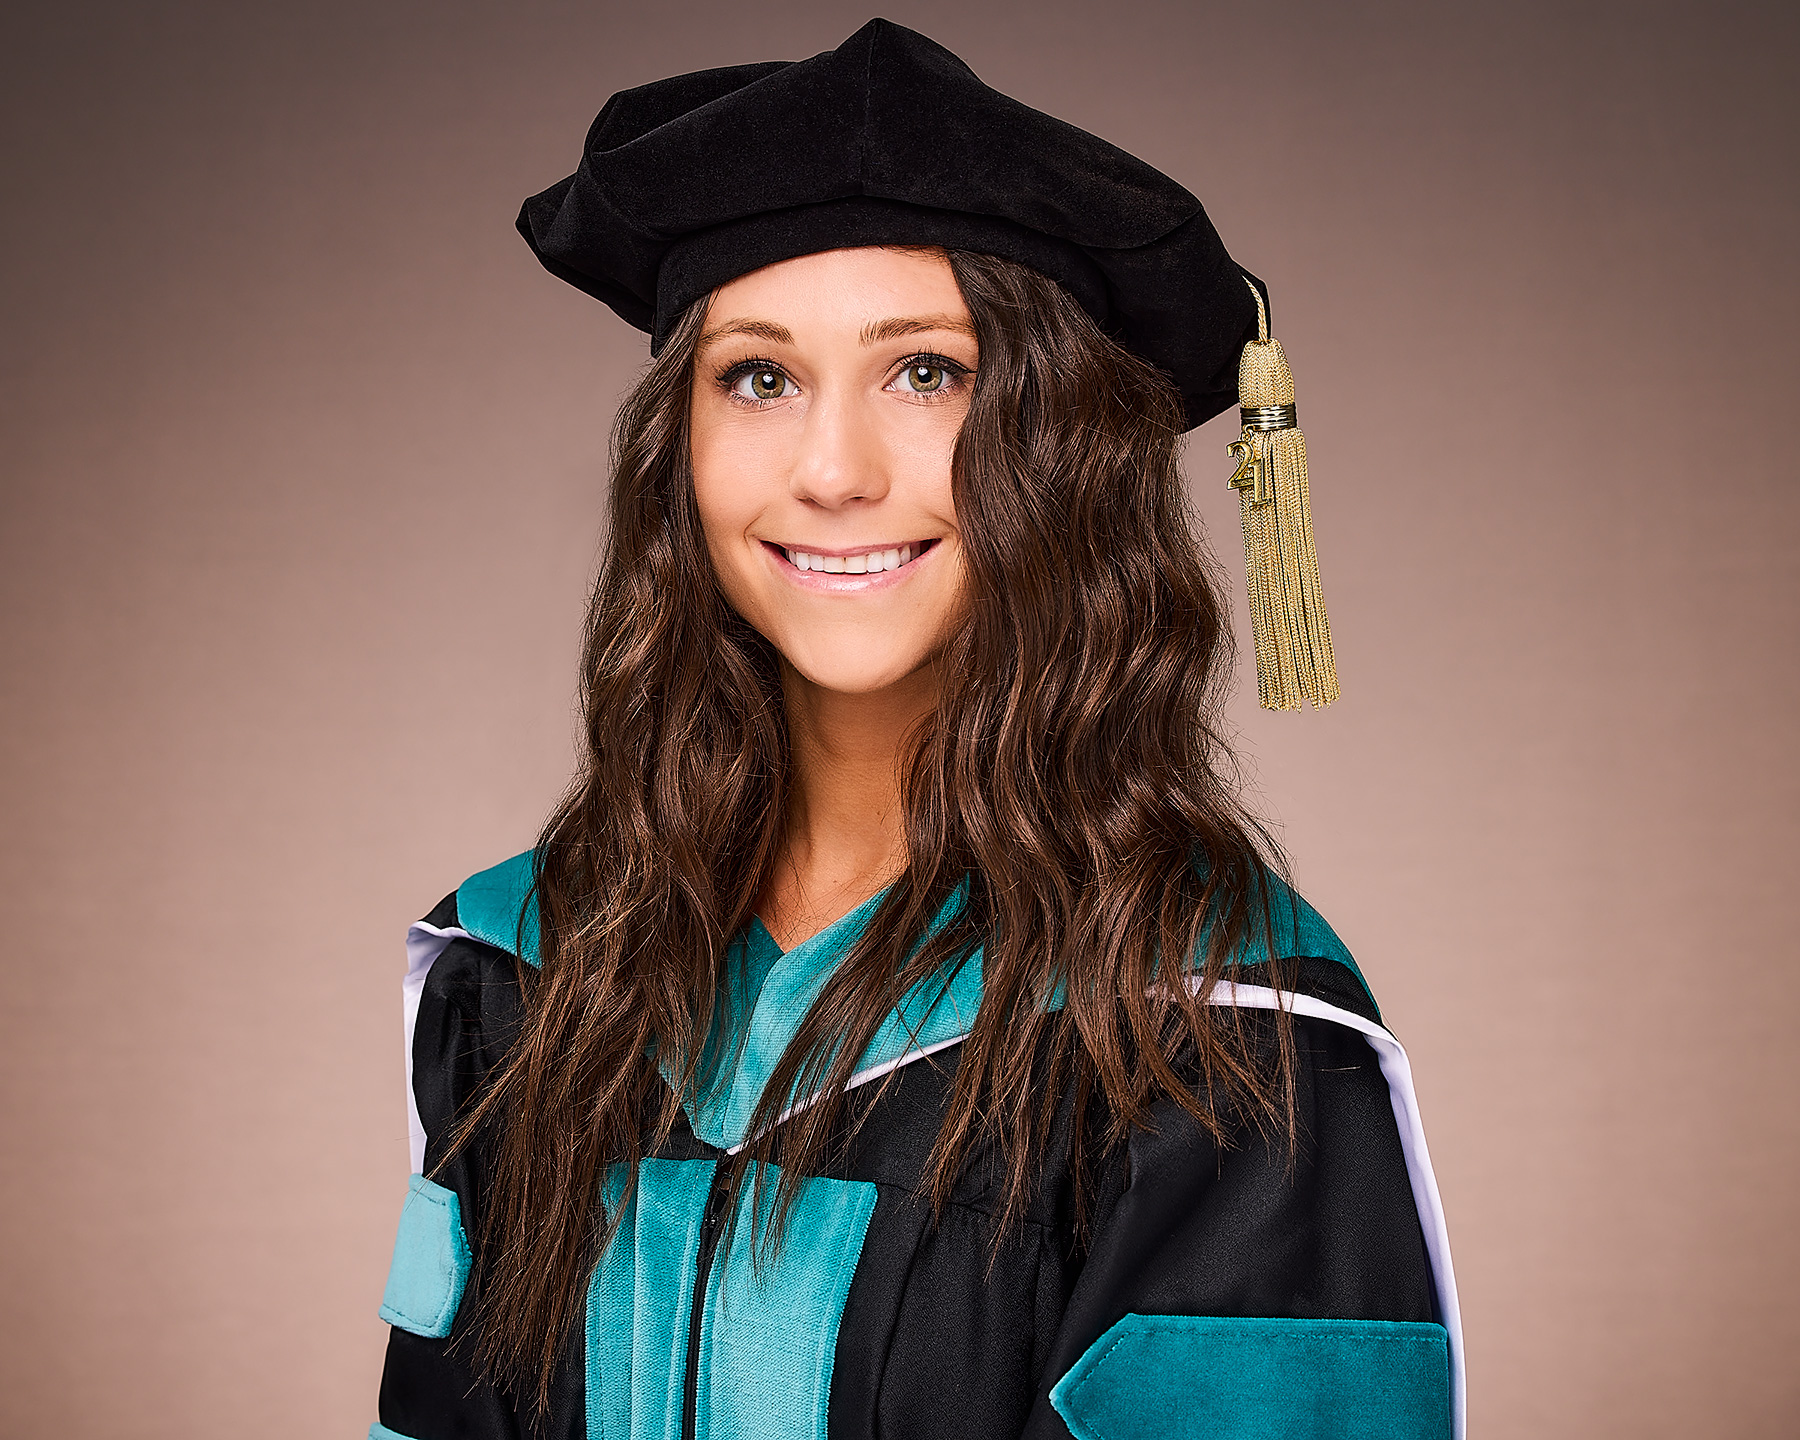 A graduation portrait made in a studio in Los Angeles by The Light Committee